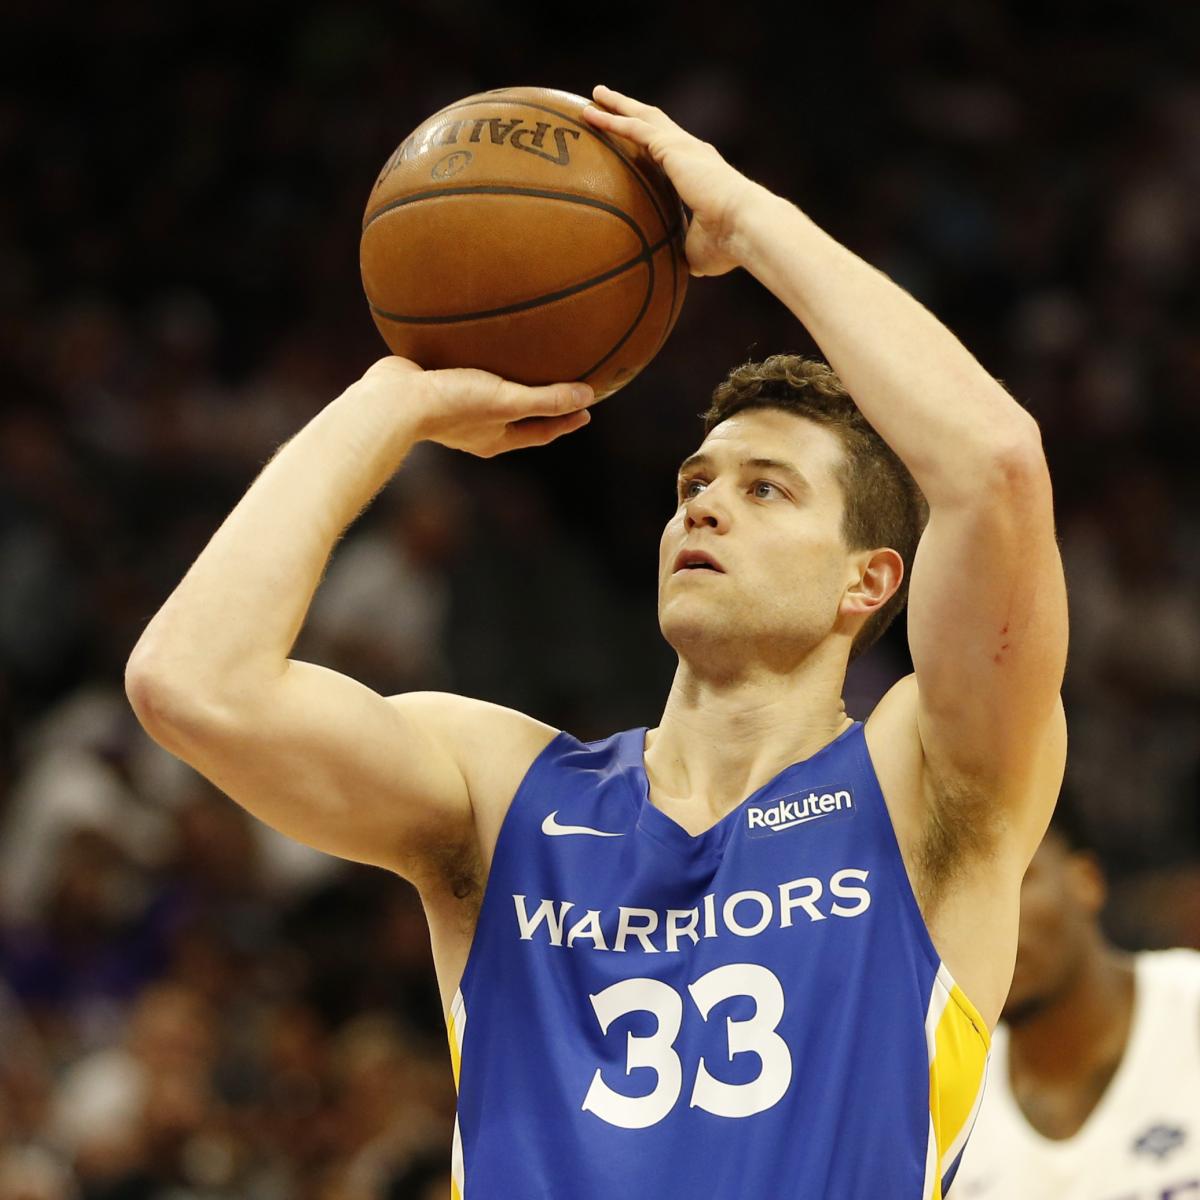 CBA: Jimmer Fredette scores 70 points for Shanghai Sharks in China – and  still loses